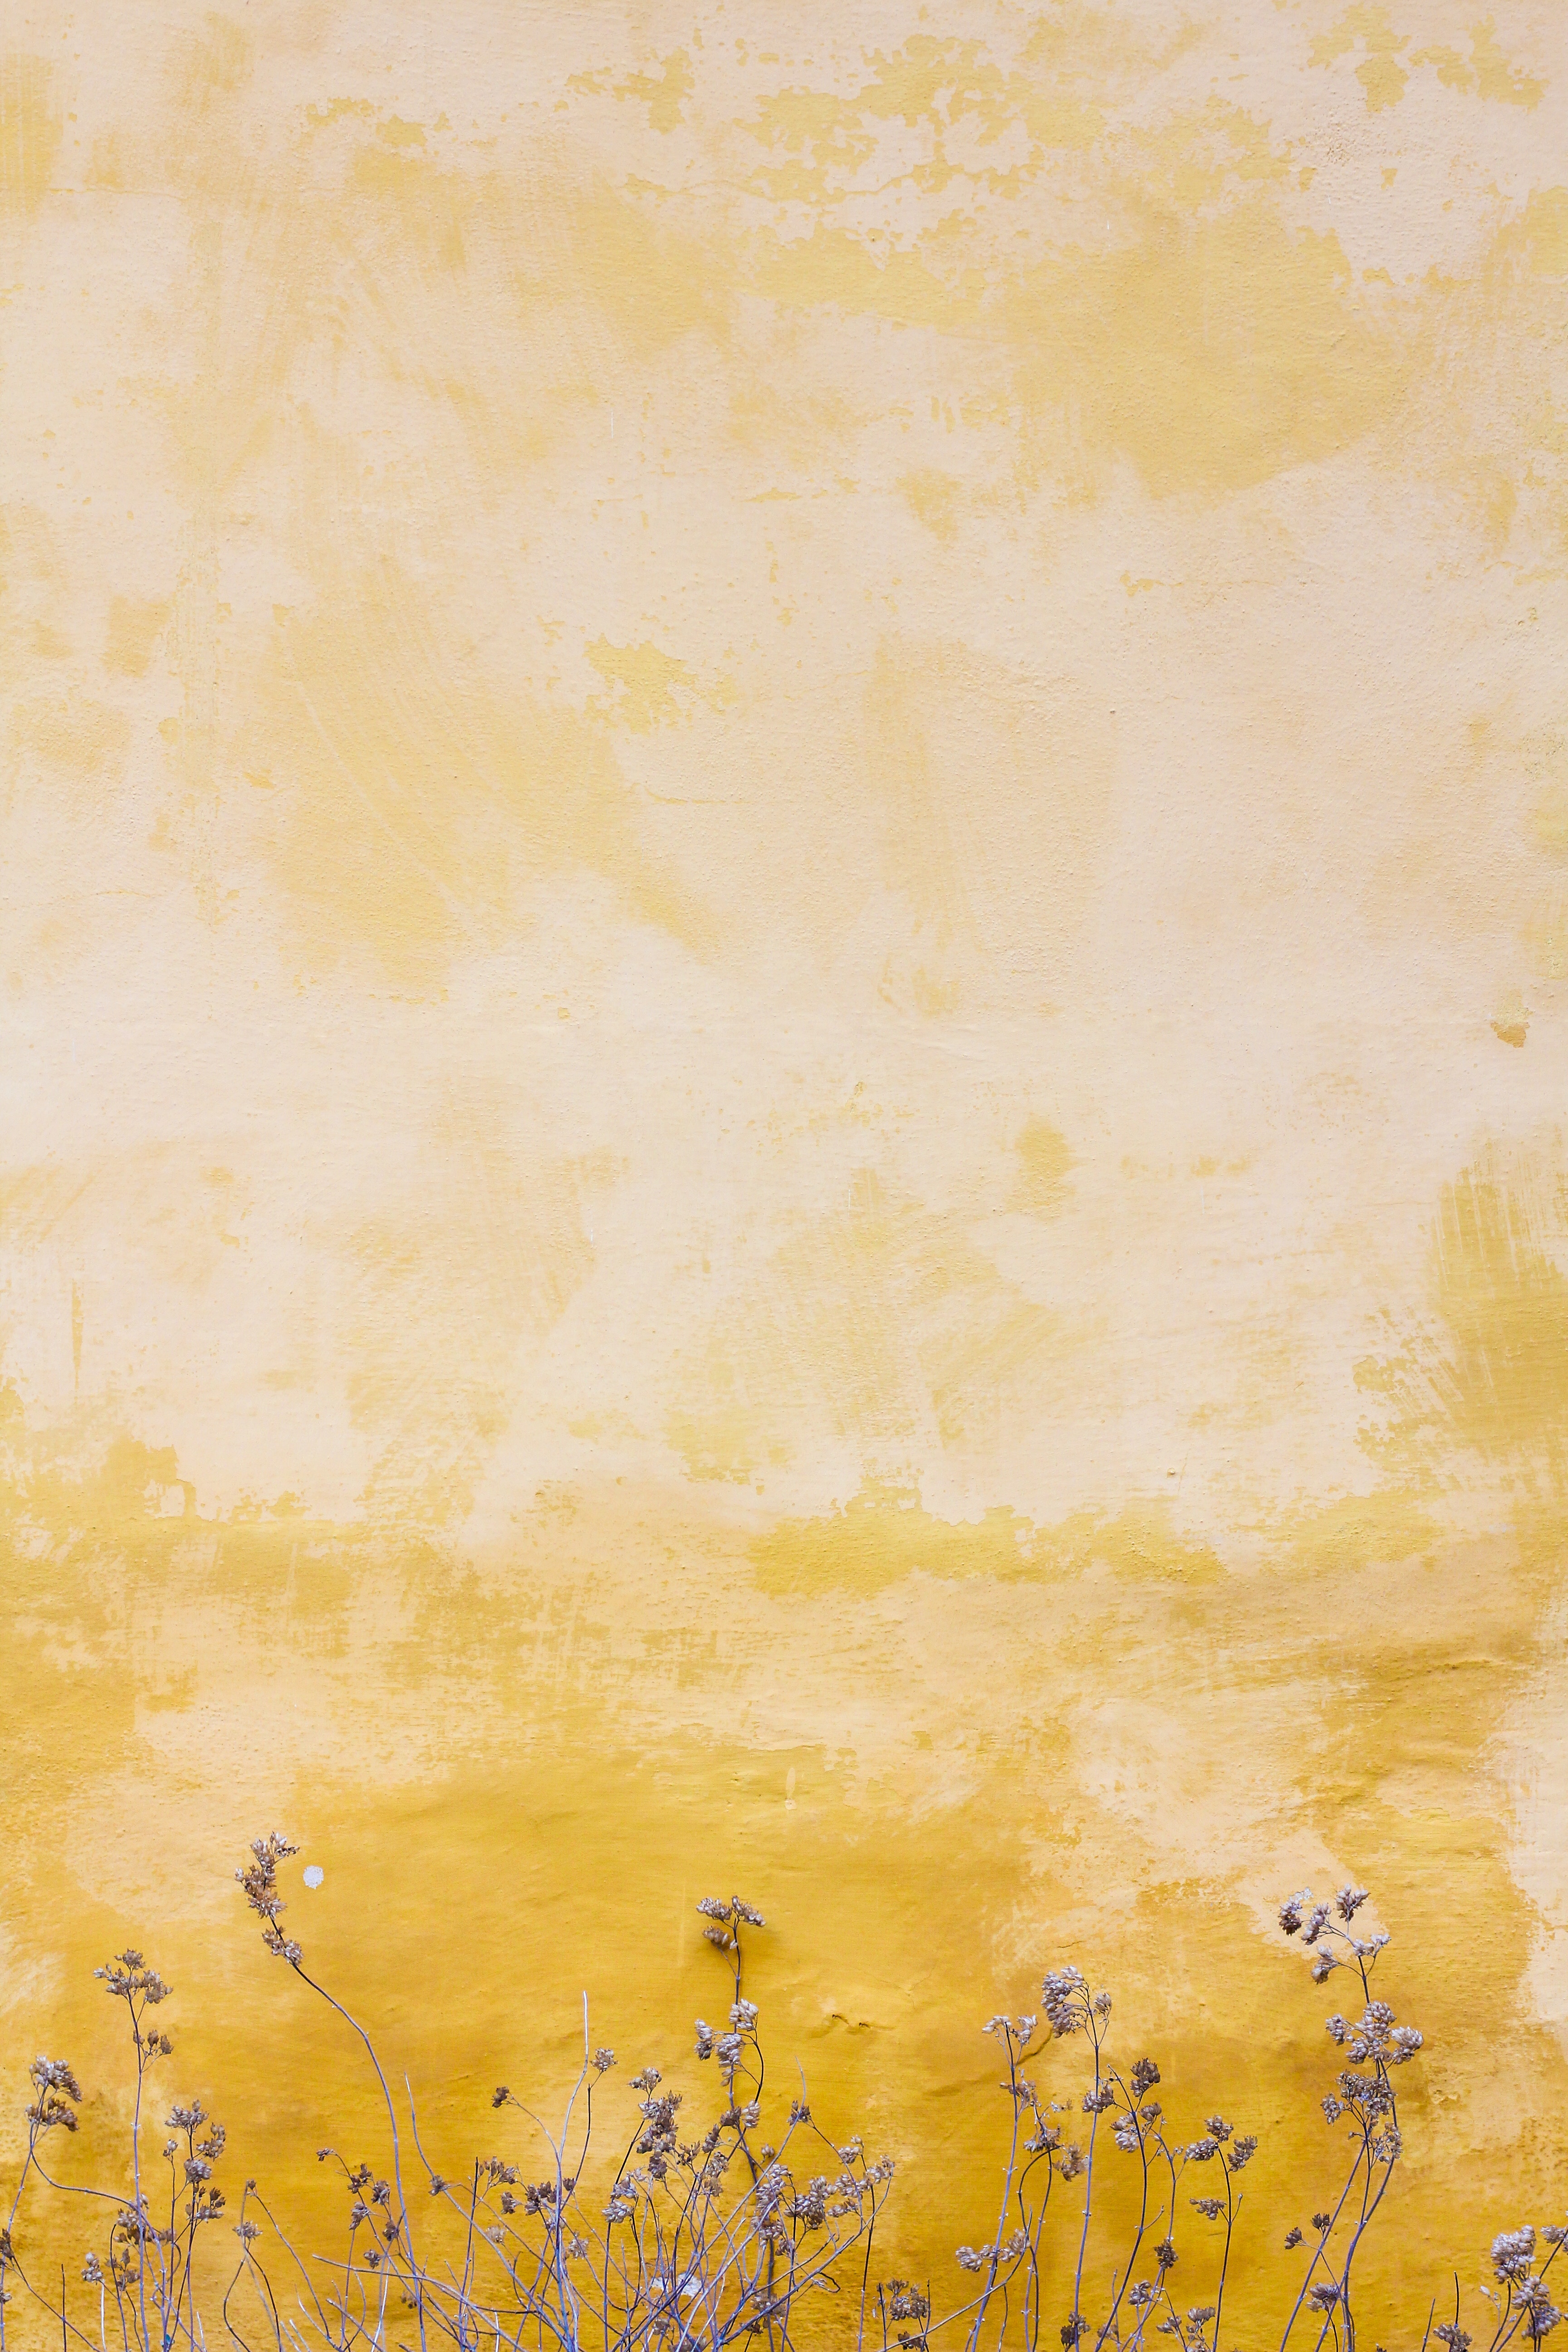 Wallpaper Full HD stains, plants, yellow, texture, textures, wall, spots